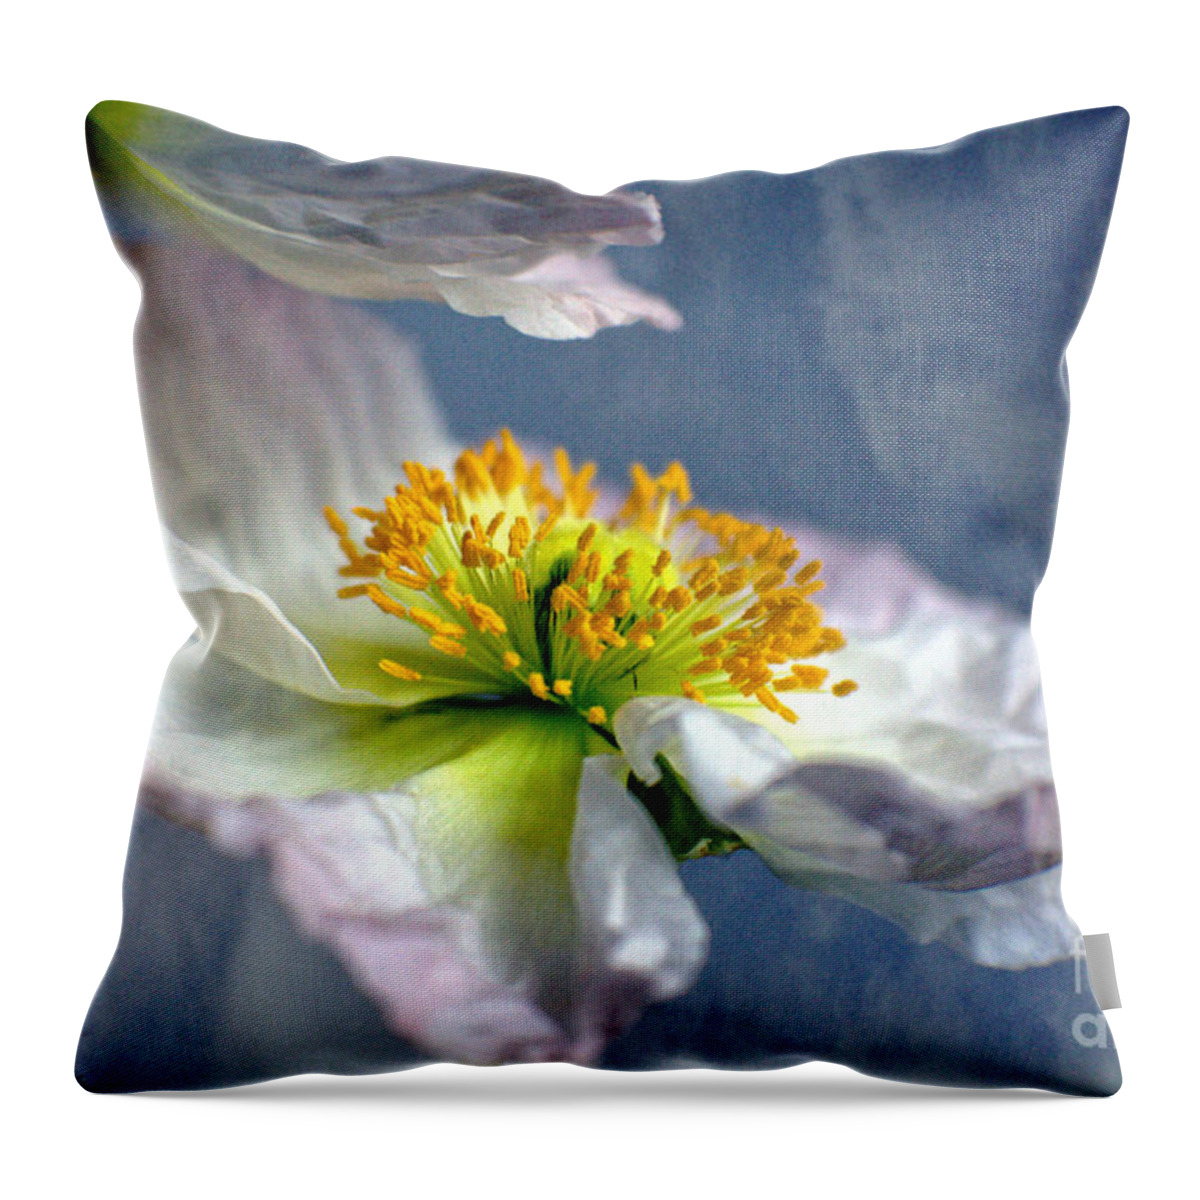 Art Throw Pillow featuring the photograph Love You Just The Way You Are by Ella Kaye Dickey